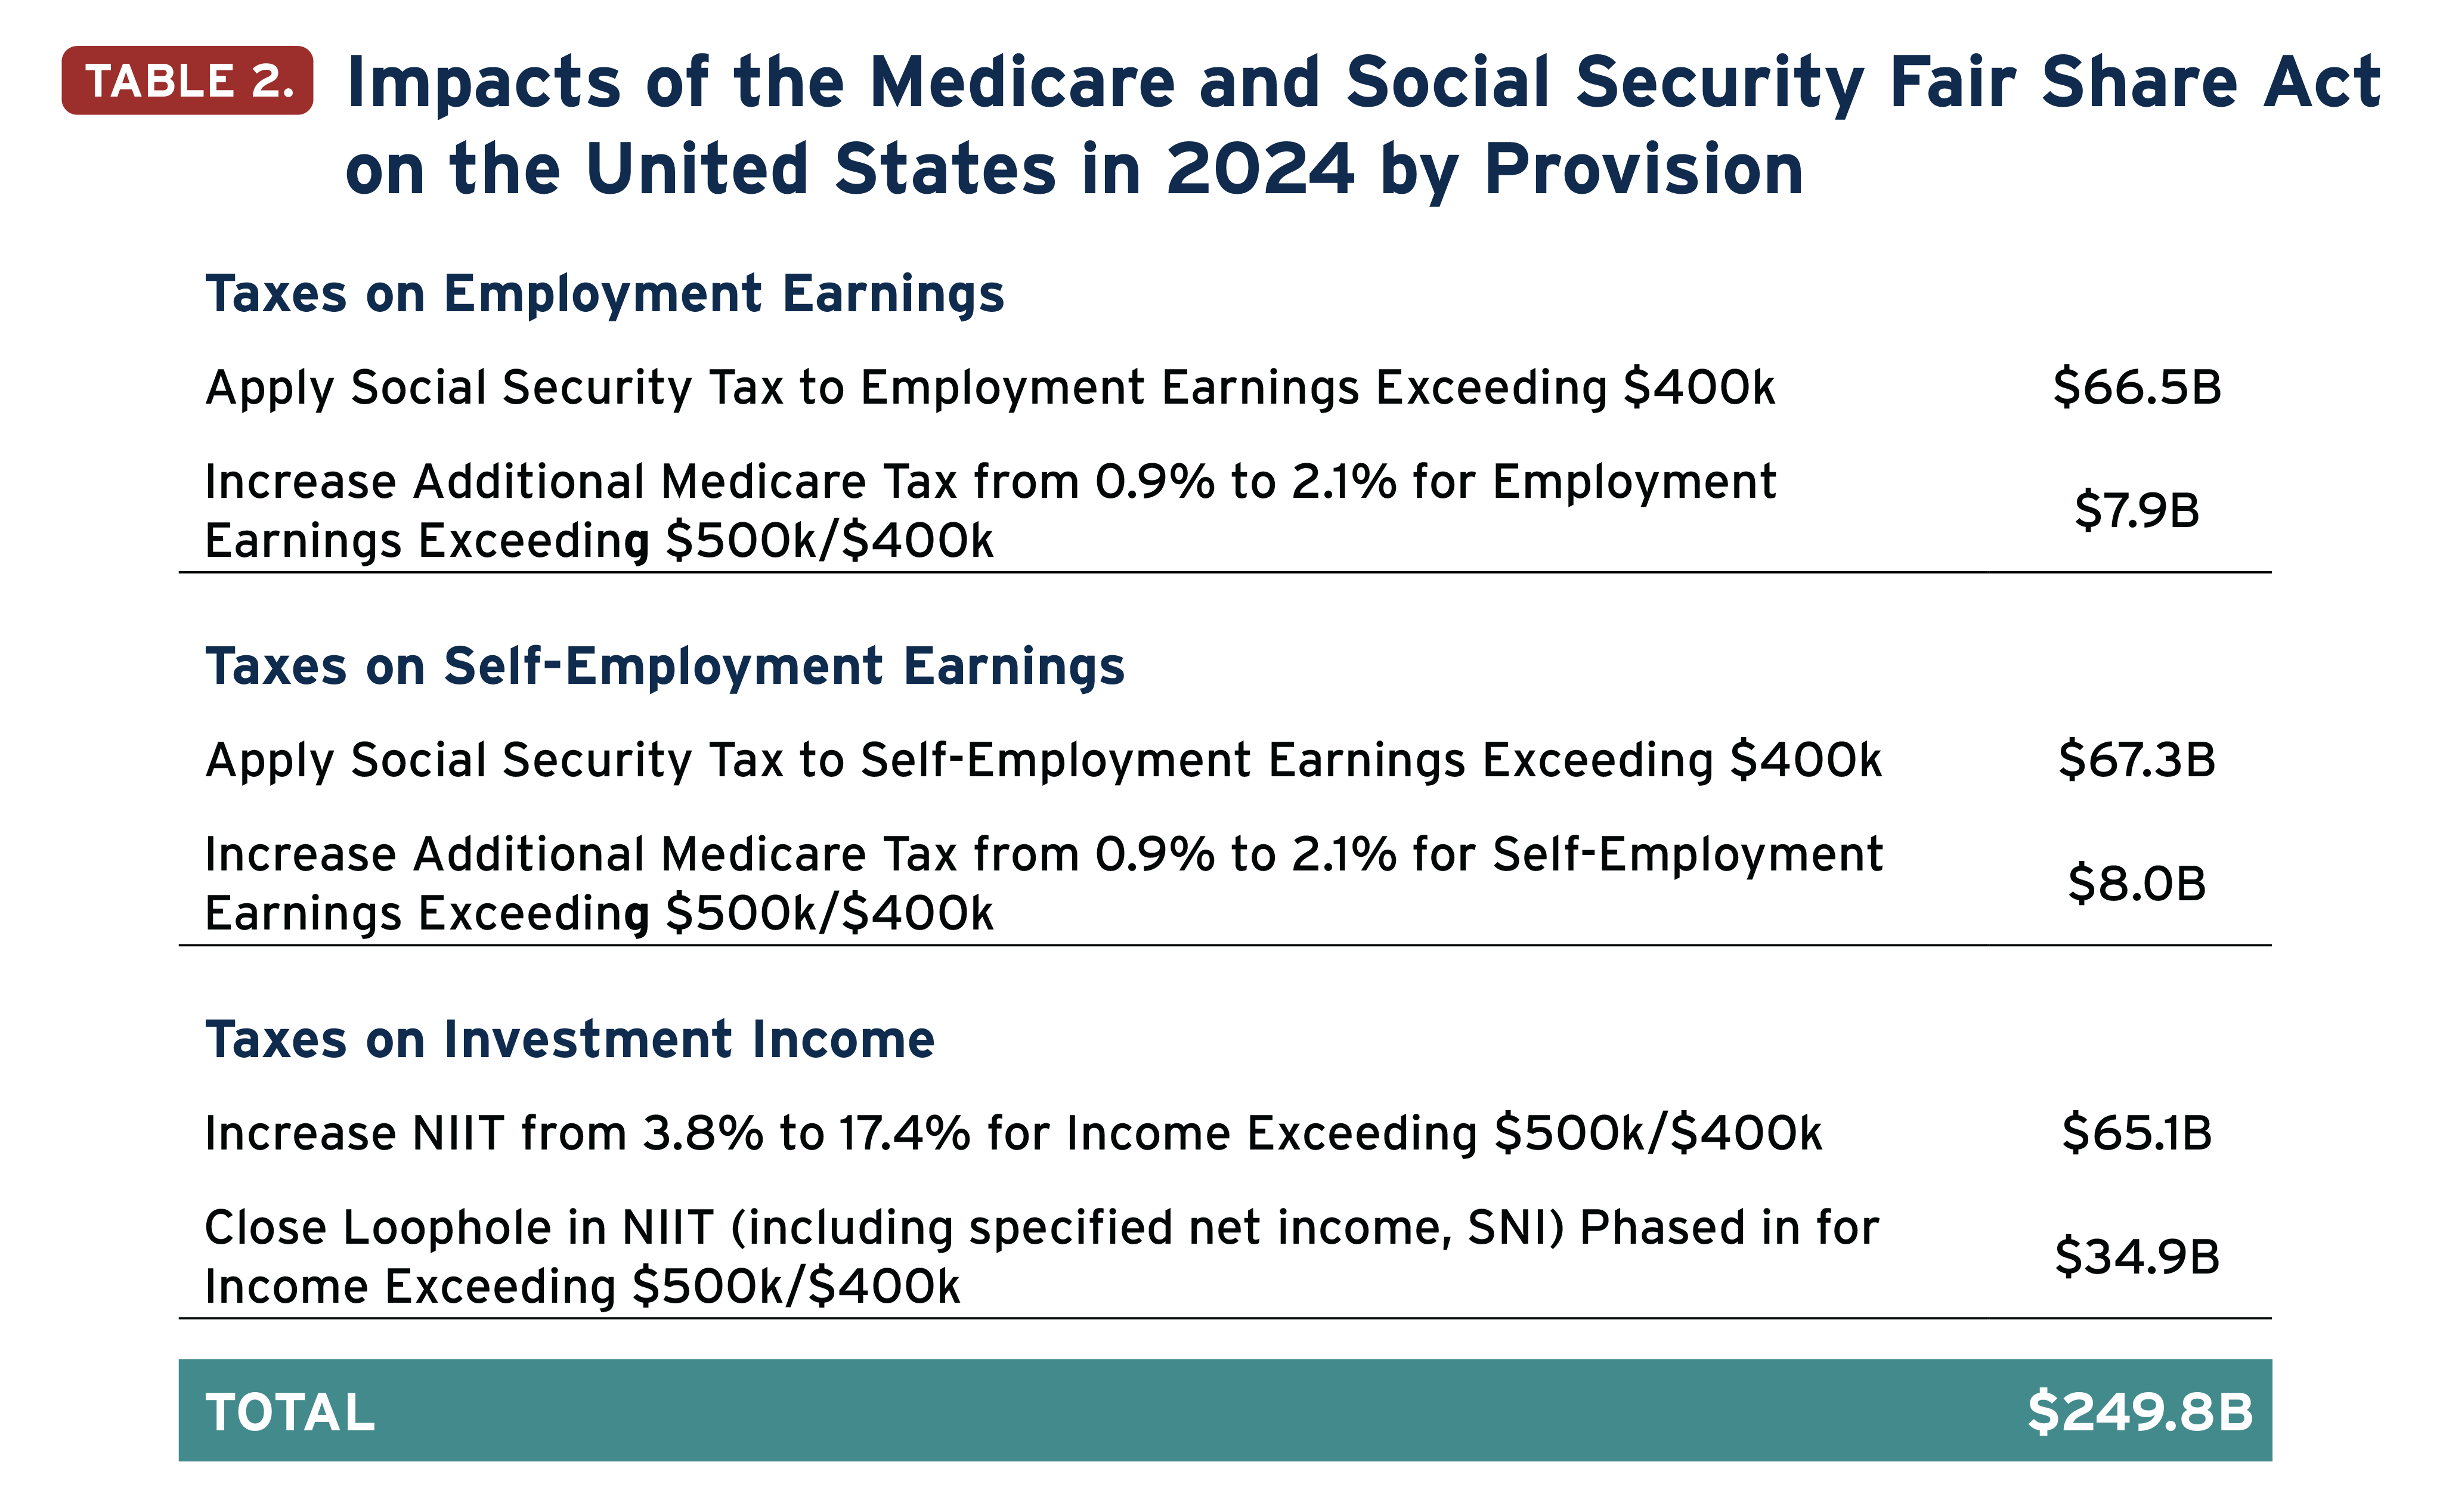 Learn About FICA, Social Security, and Medicare Taxes